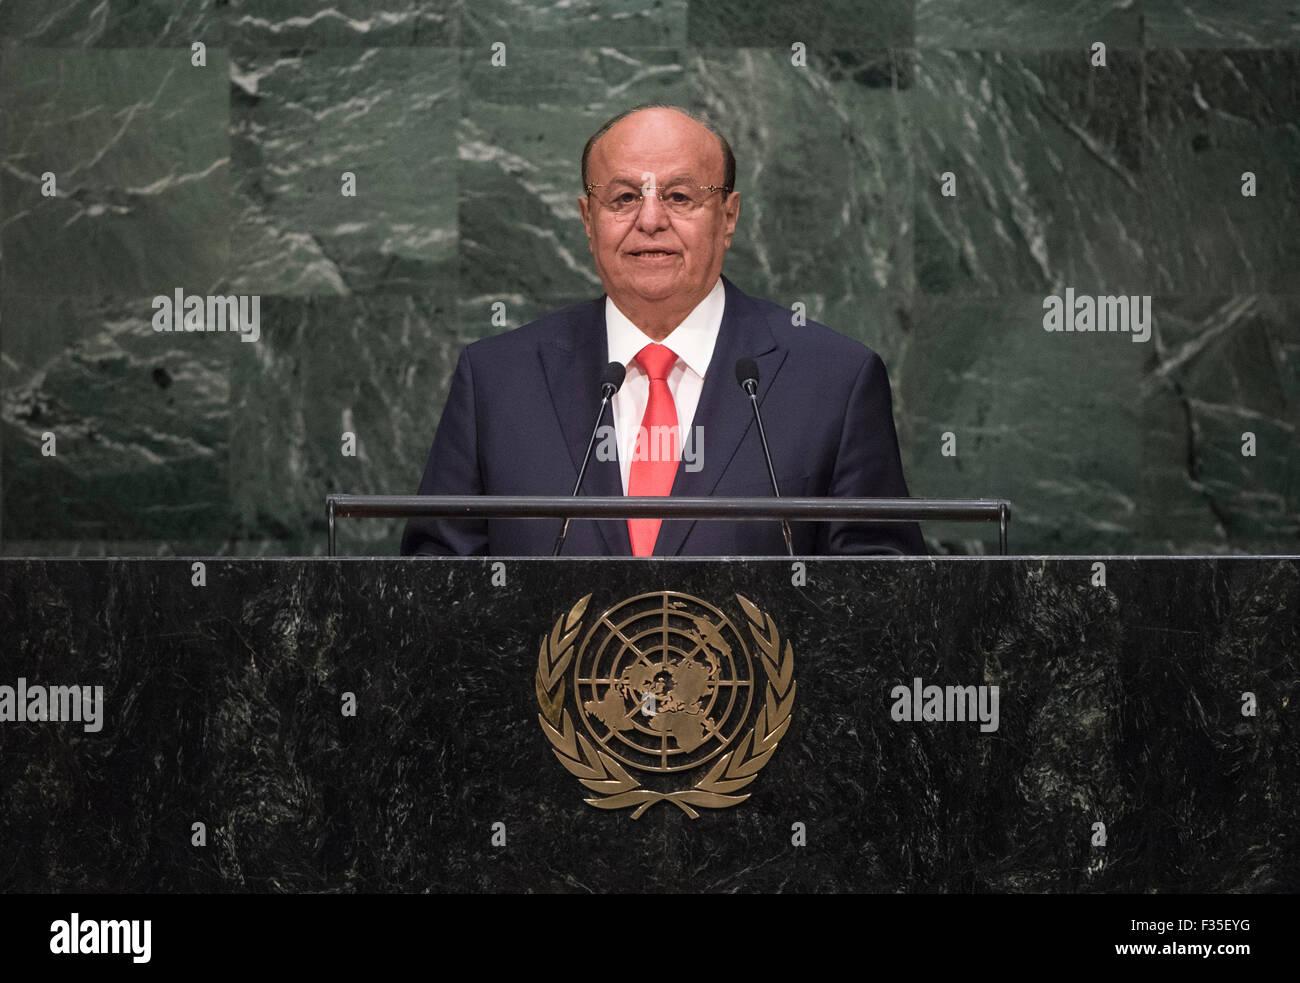 New York, NY, USA 29th Sep, 2015. Yemeni President Abd-Rabbu Mansour Hadi addresses the 70th session of the United Nations General Assembly at the United Nations headquarters in New York, on Sept. 29, 2015. Credit:  UN Photo/Cia Pak/Xinhua/Alamy Live News Stock Photo